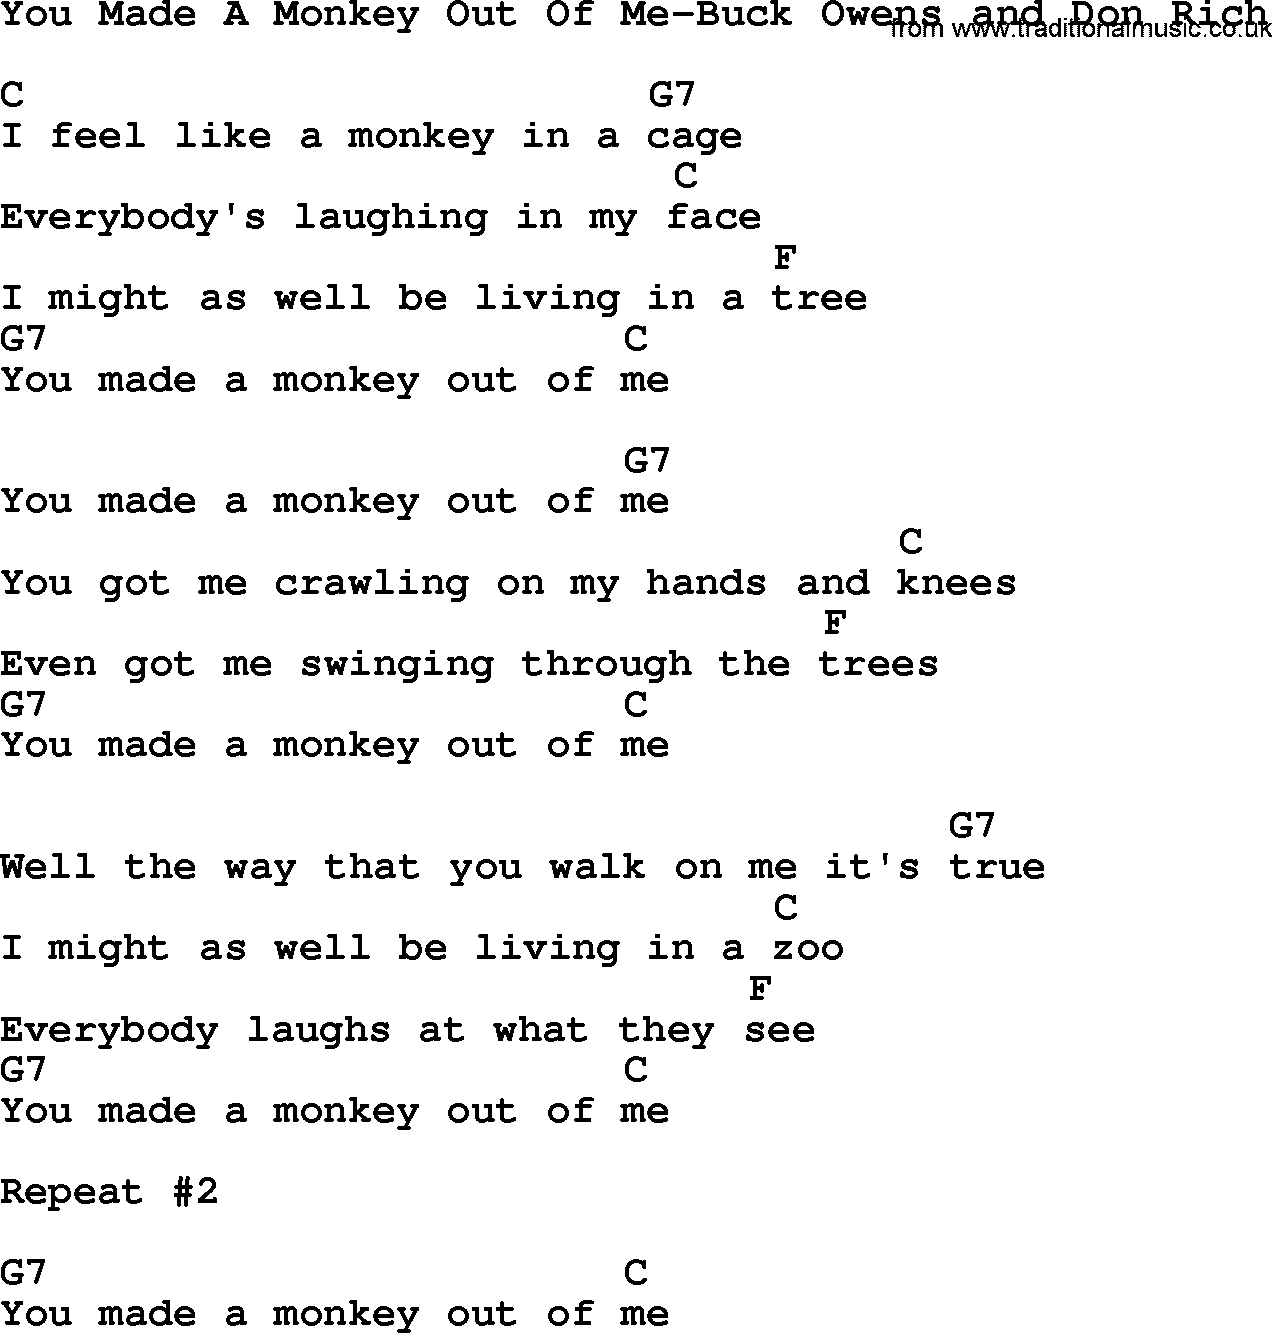 Country music song: You Made A Monkey Out Of Me-Buck Owens And Don Rich lyrics and chords